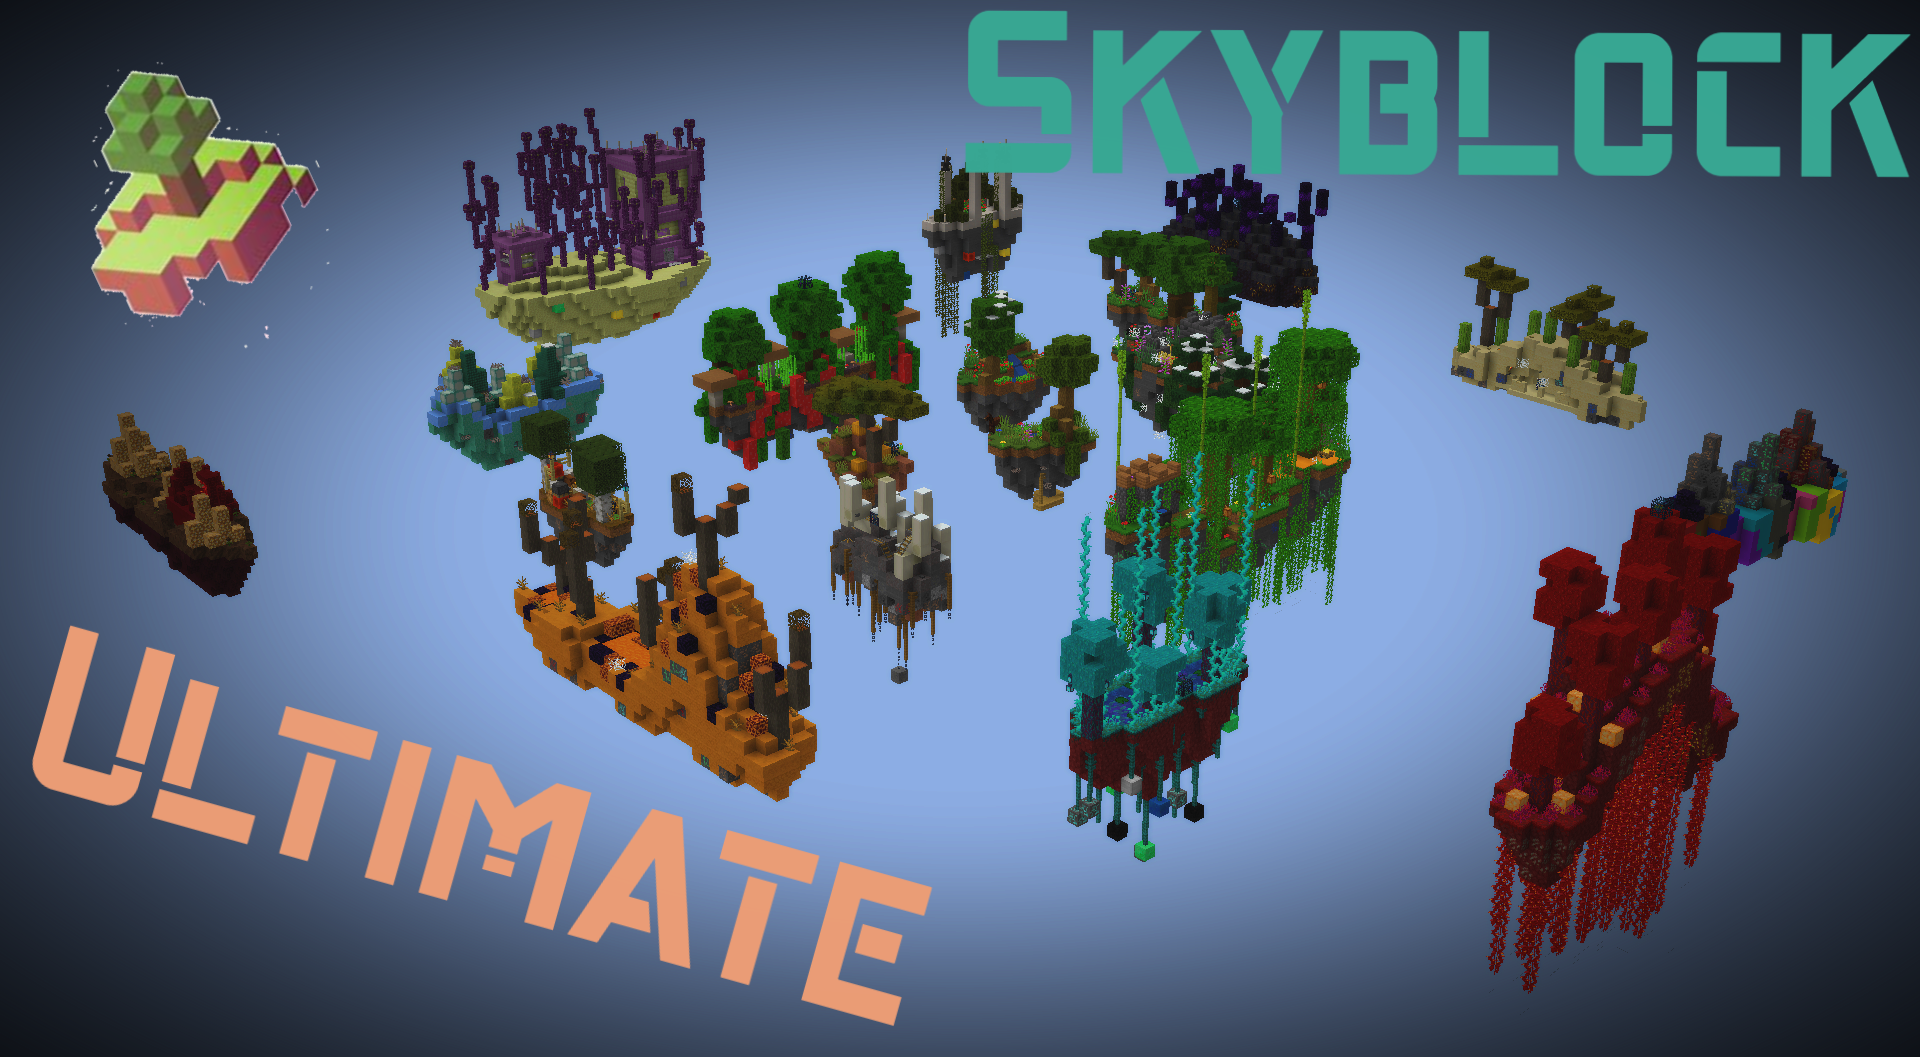 download-skyblock-ultimate-25-mb-map-for-minecraft